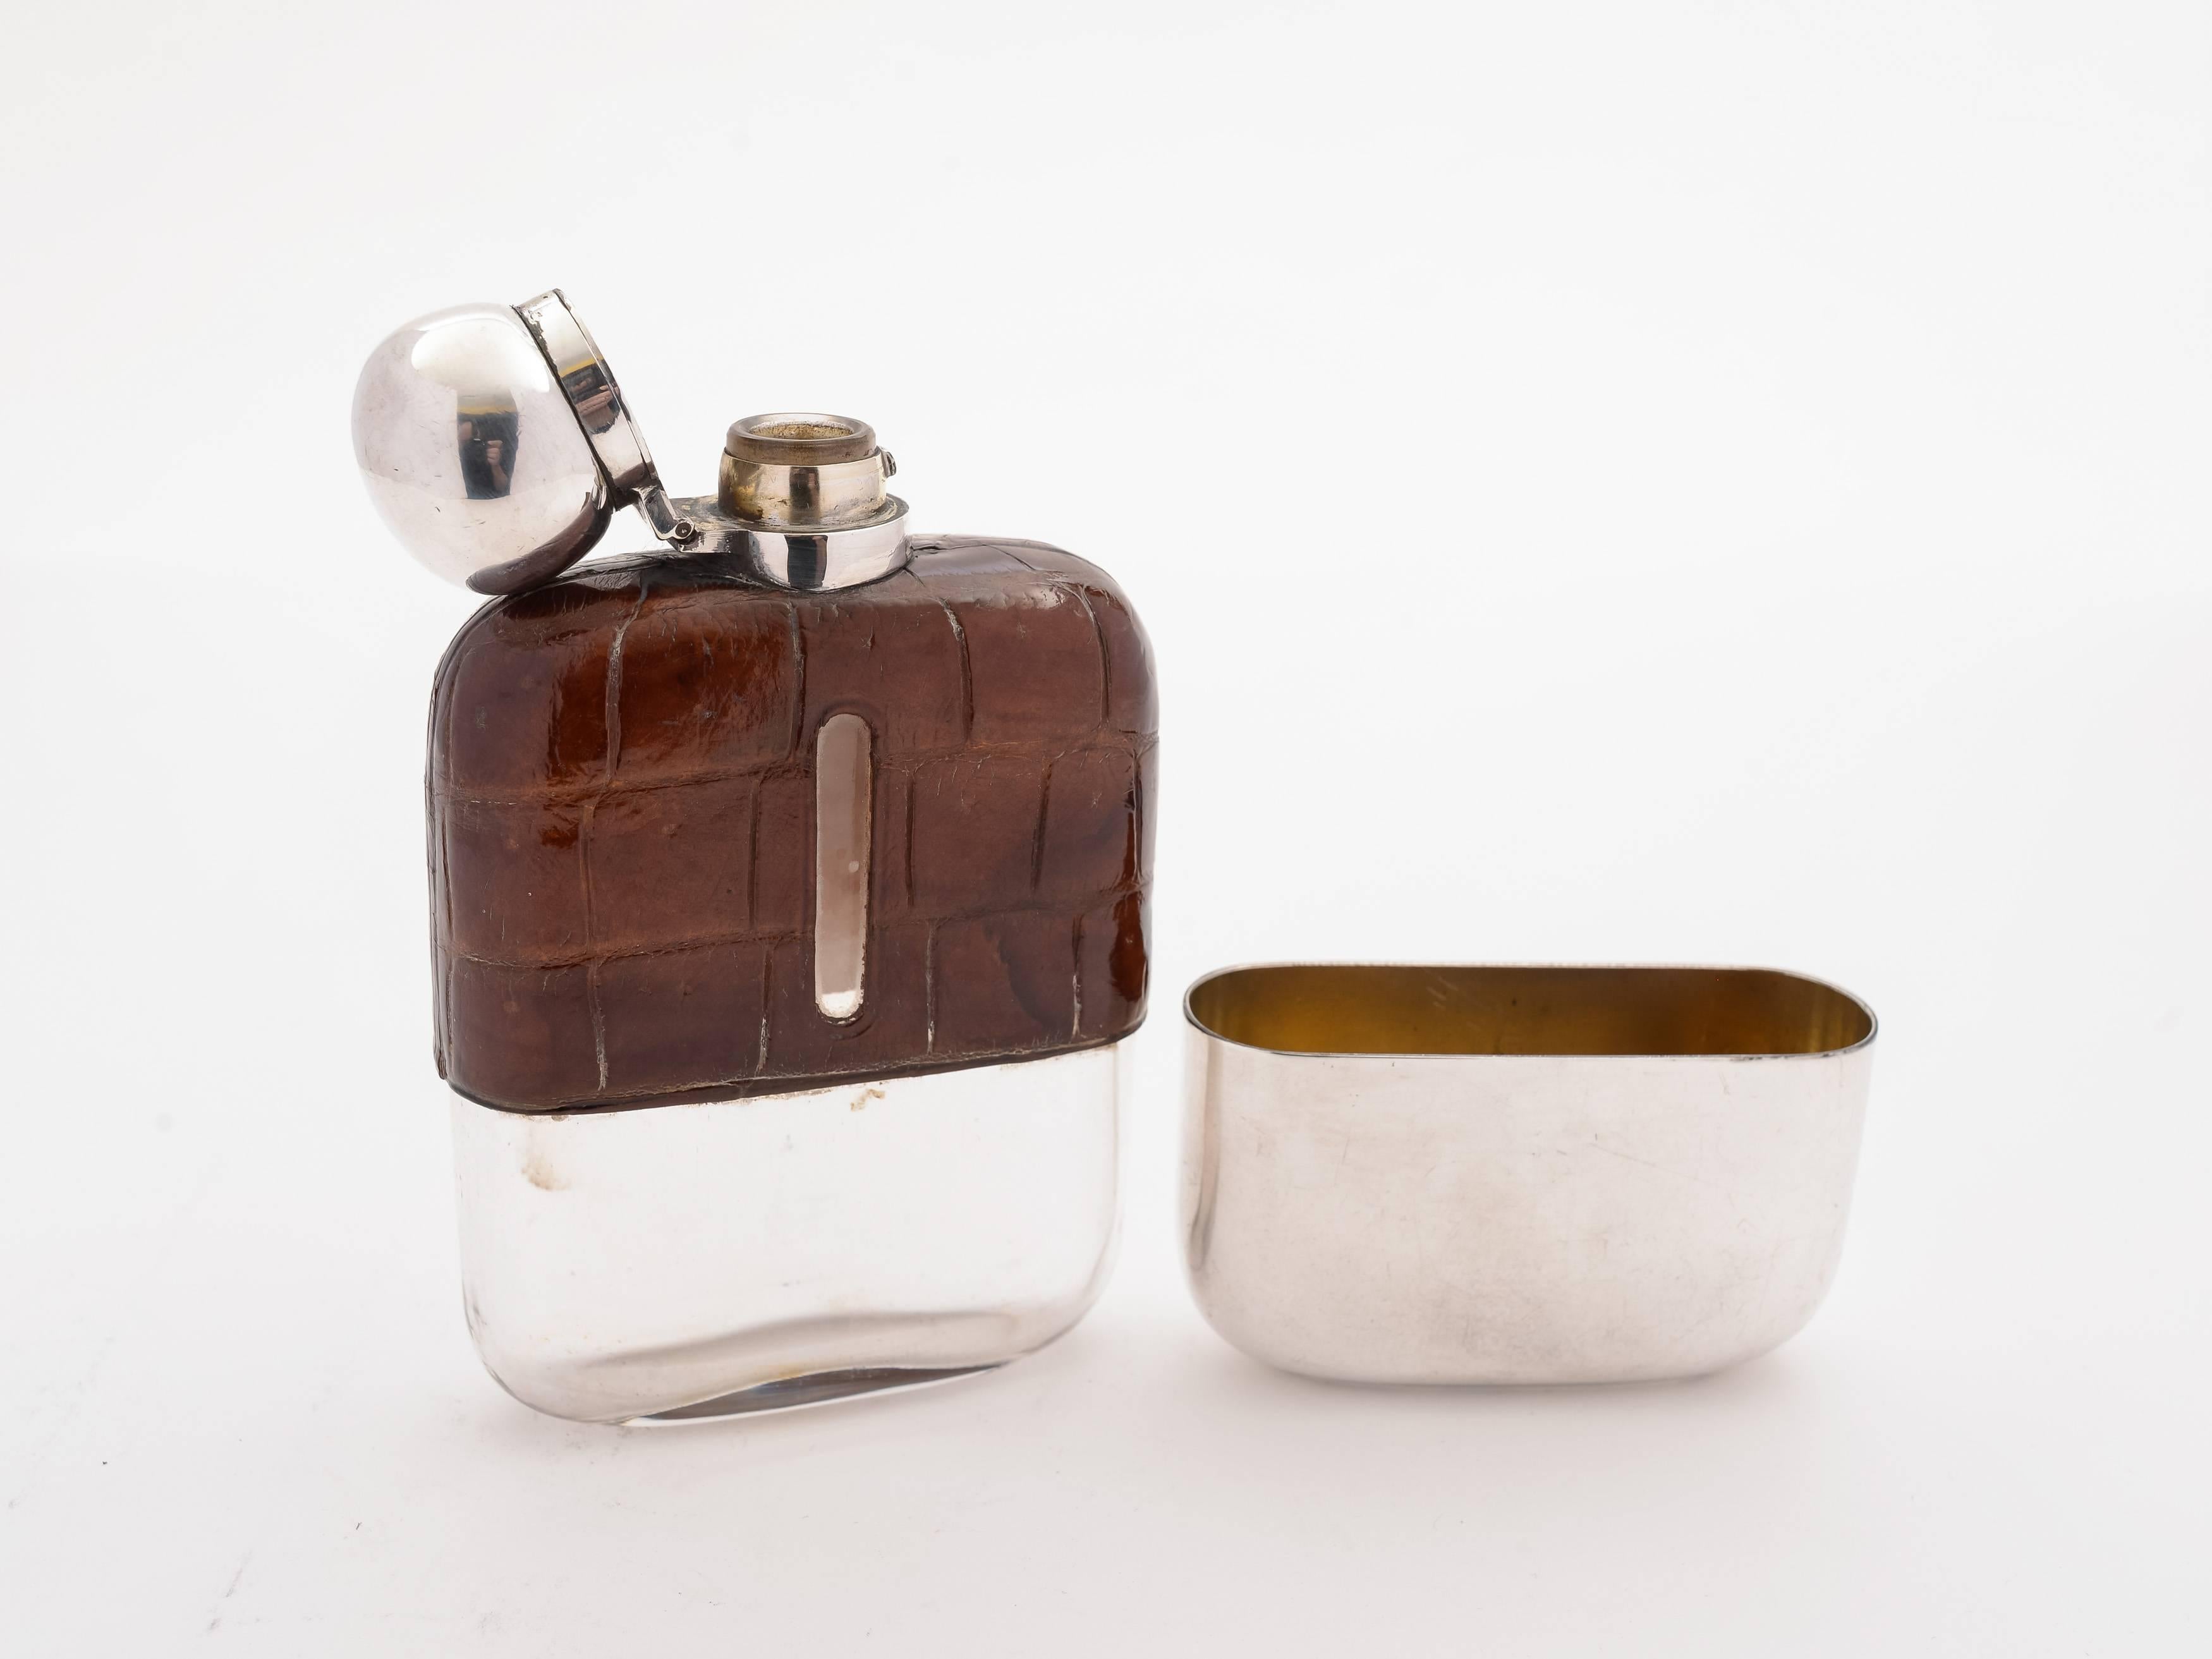 A nice English Edwardian silver plated hip flask with crocodile leather cover, bayonet top and pull-off cup. Circa 1905. 

FREE worldwide delivery.

Measurements:
Height: 5 1/2" (approx 13.75cm)
Length: 3 1/2" (approx 8.75cm)
Width: